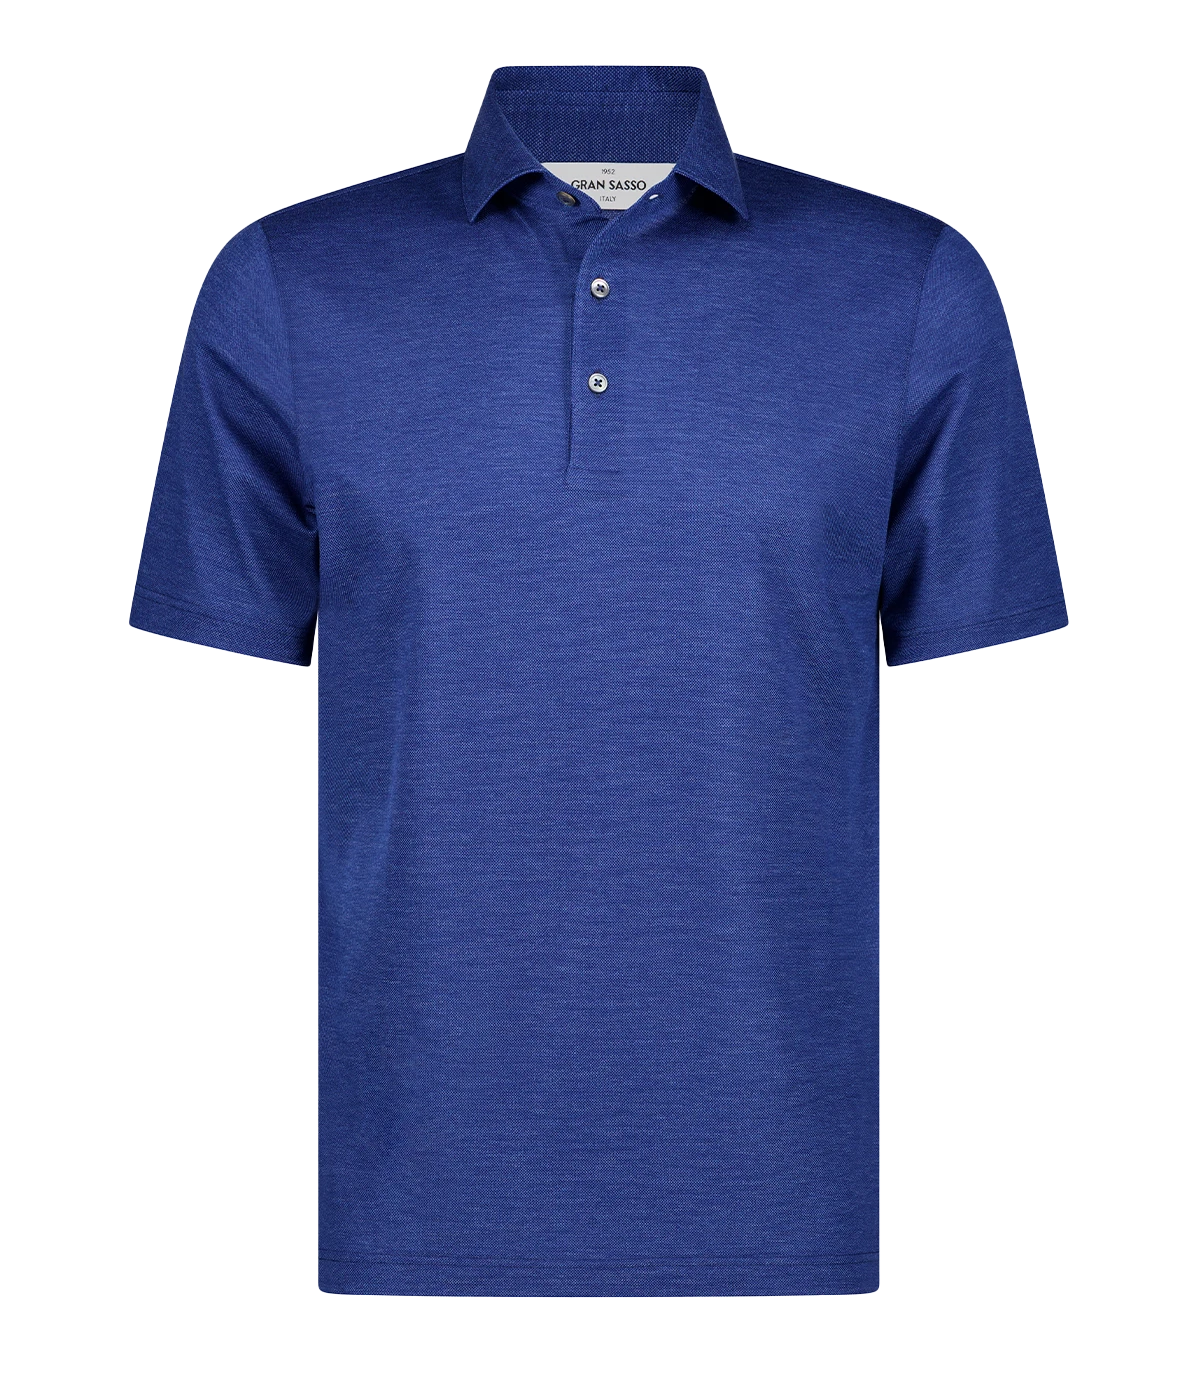 A timeless classic short sleeve polo in a marine blue, featuring a light weight cotton material, three button detail and collar. Sporty Polo, comfortable, made in Italy, throw on and go. 